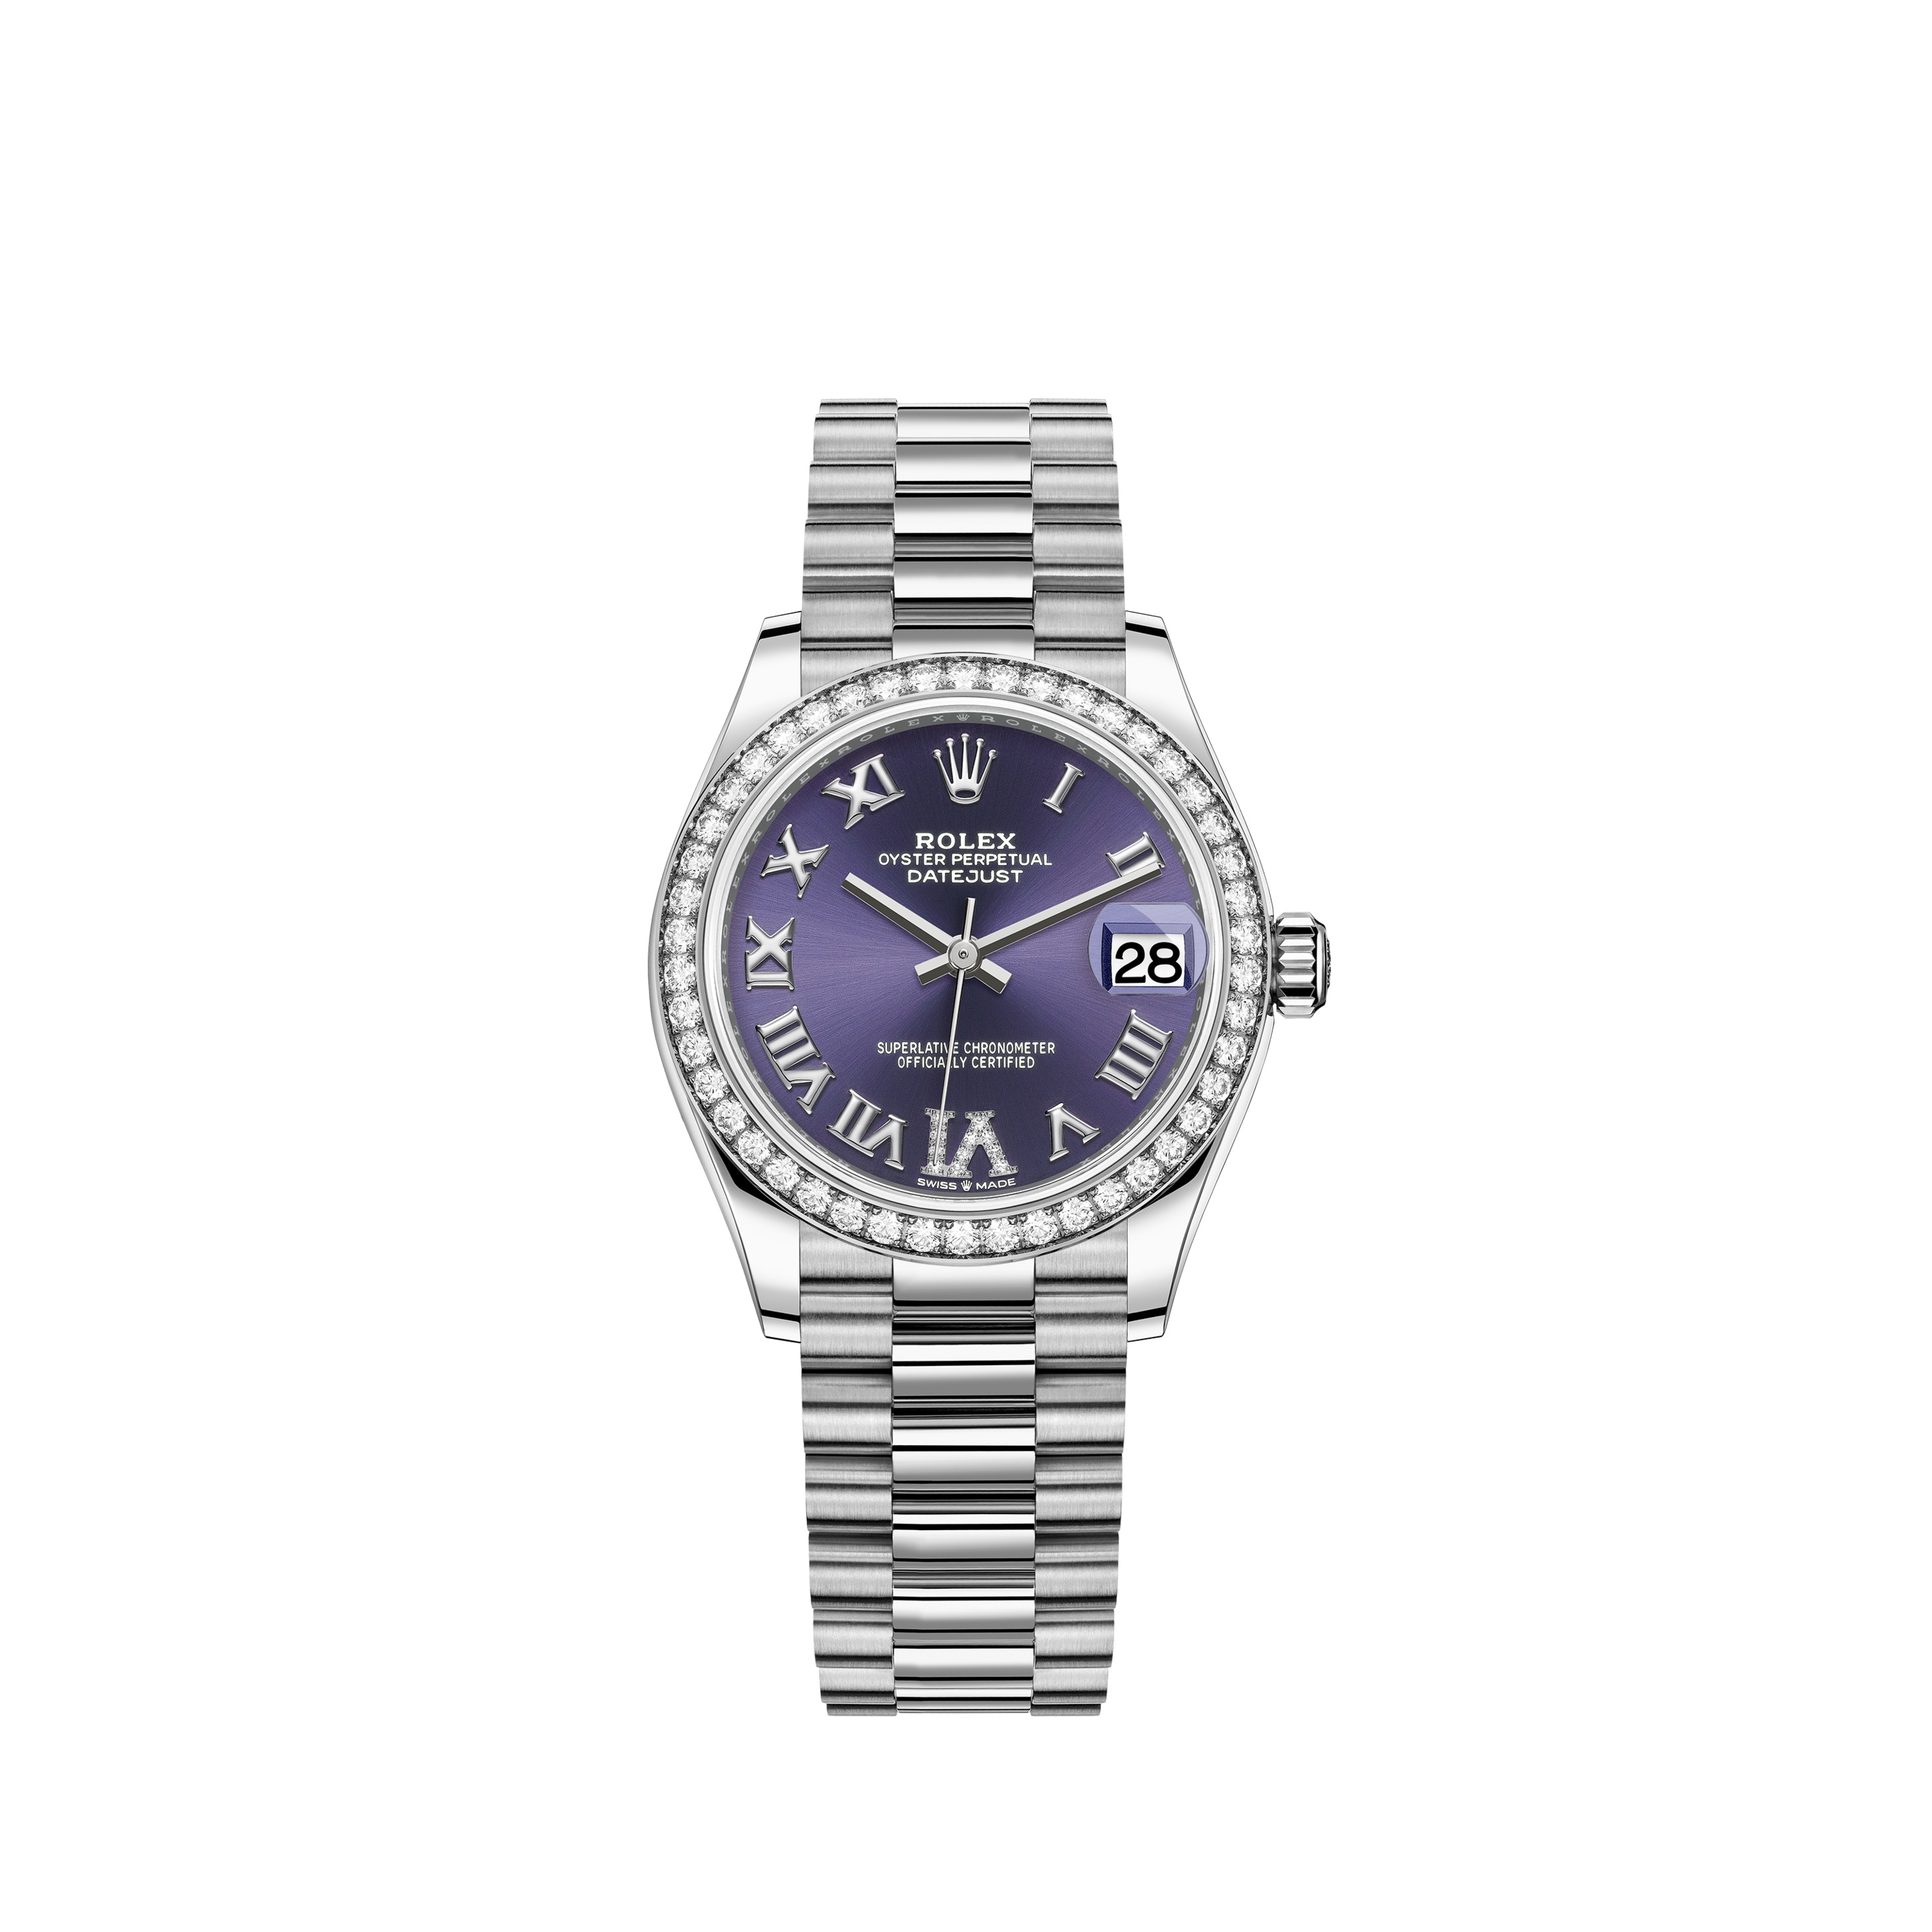 Datejust 31 278289RBR White Gold Watch (Aubergine Set with Diamonds) - Click Image to Close